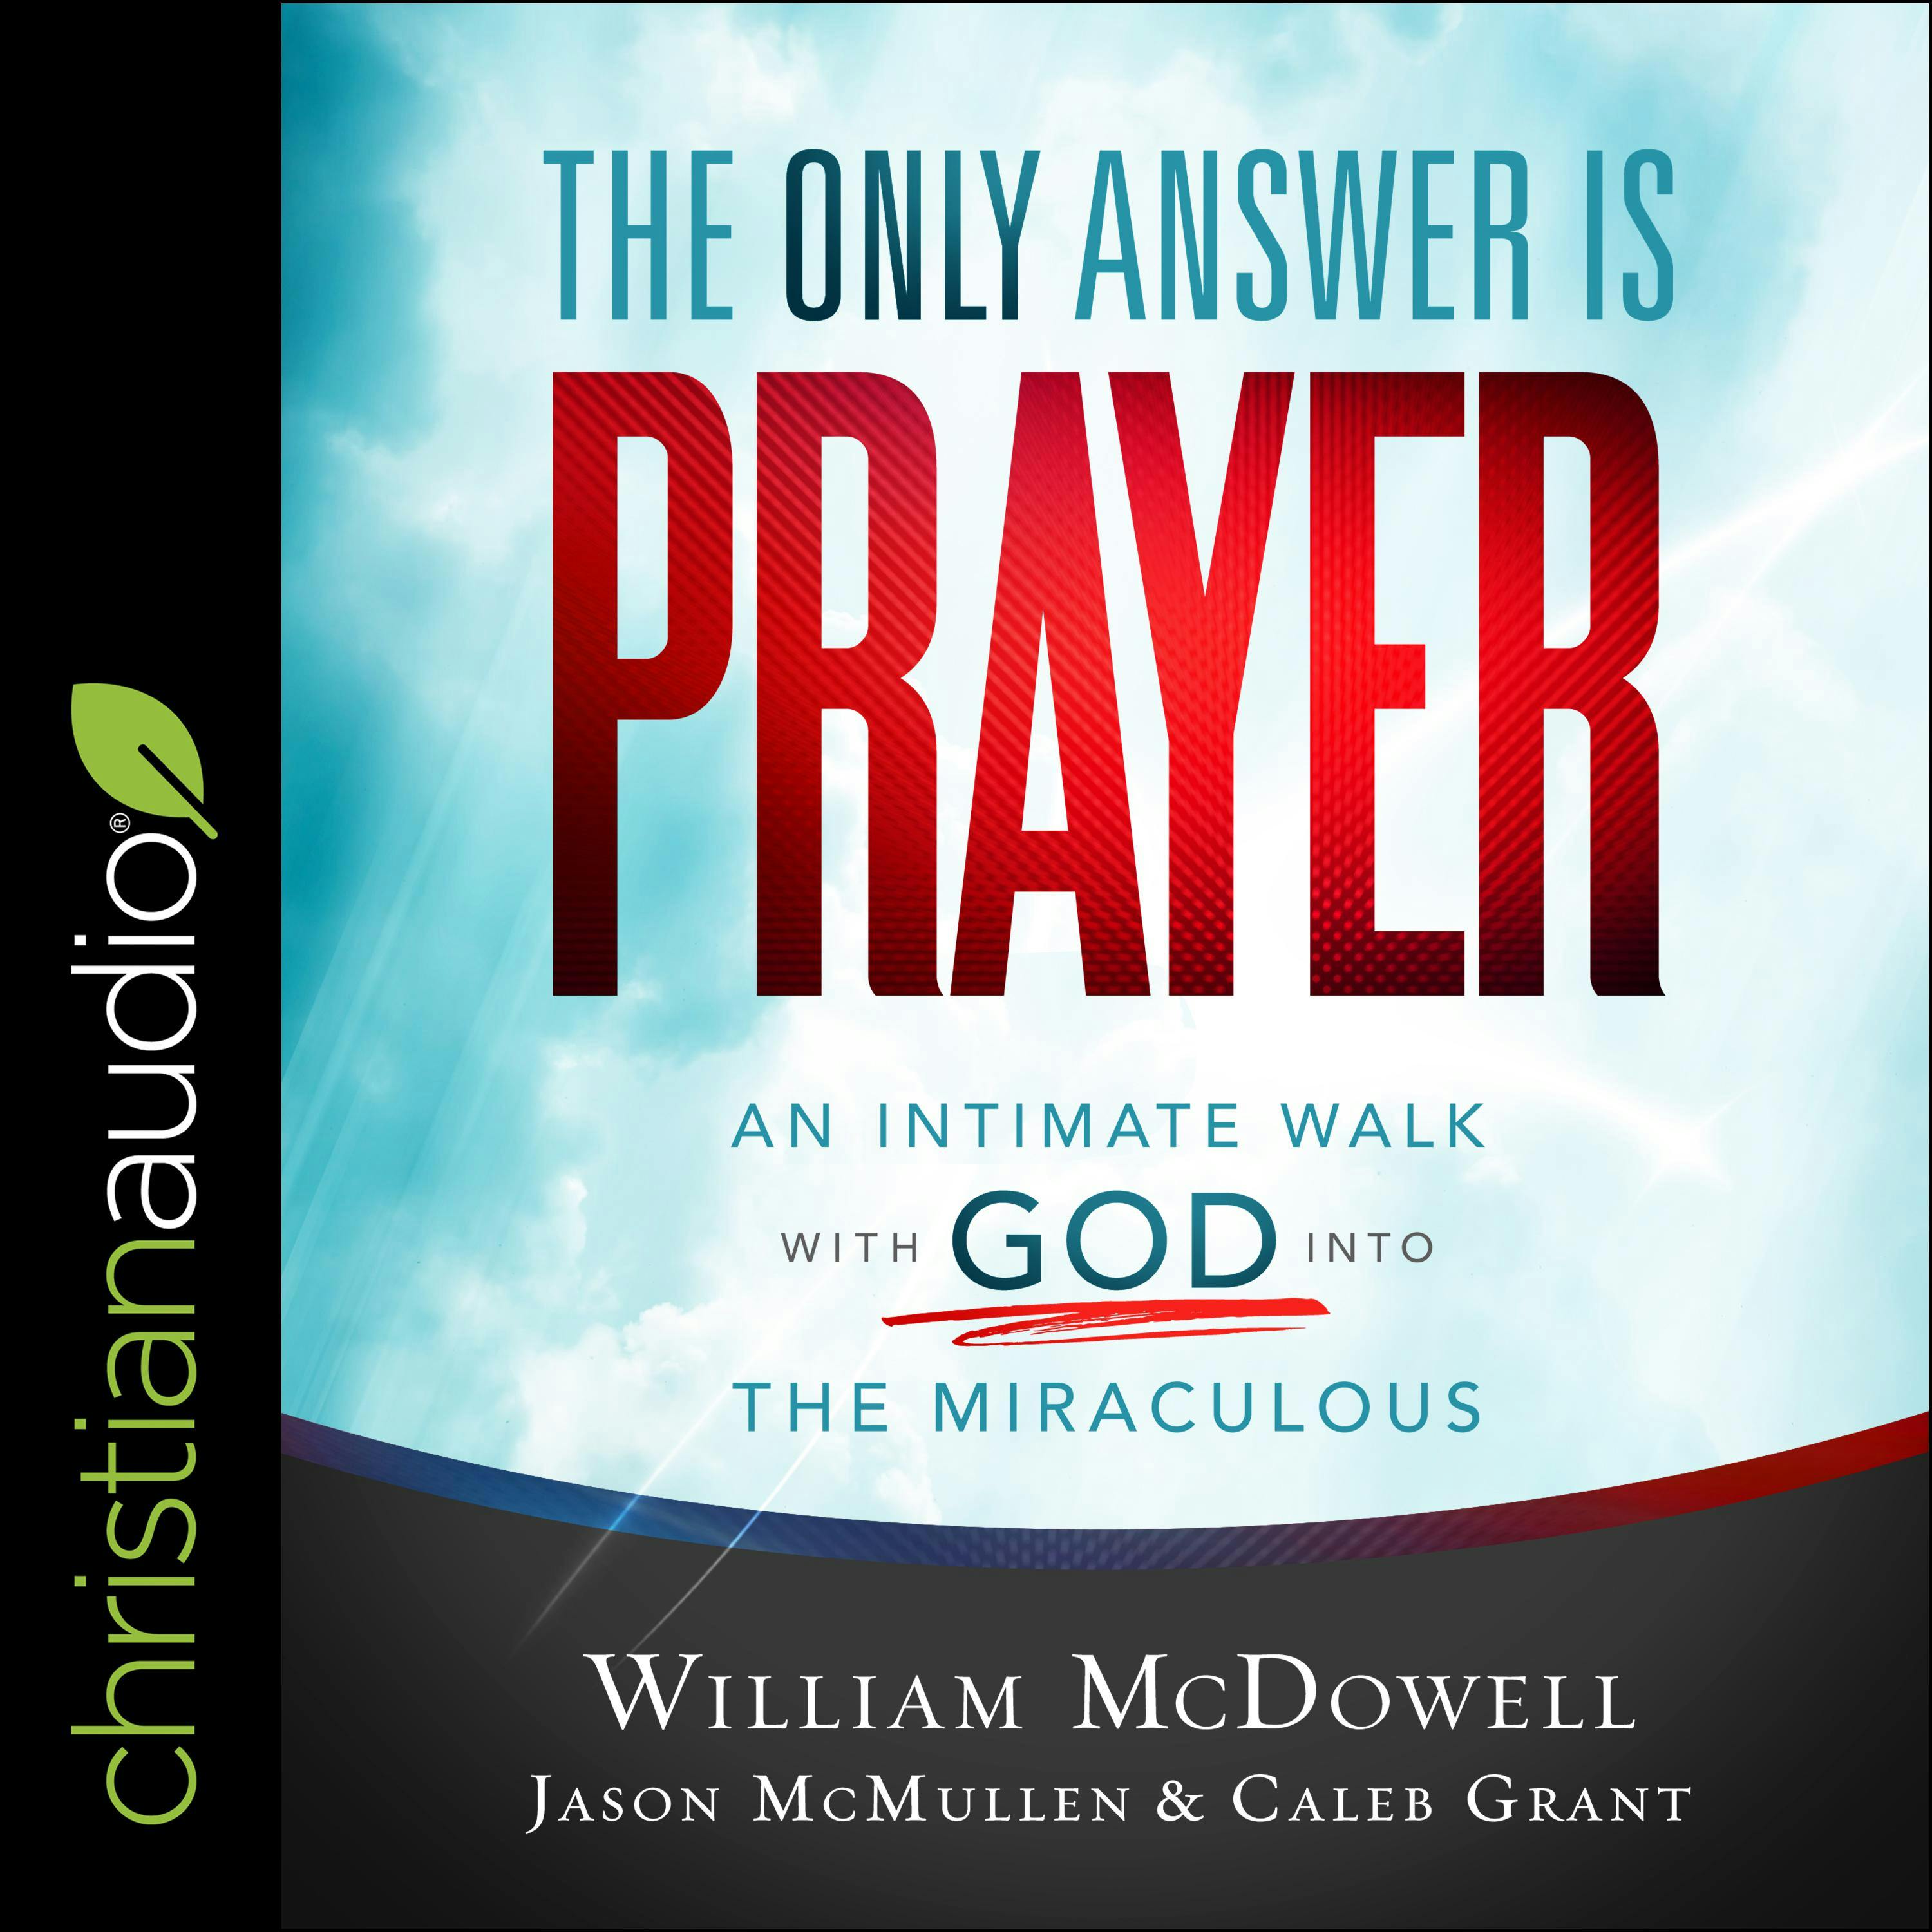 The Only Answer Is Prayer: An Intimate Walk with God into the Miraculous - Caleb Grant, William McDowell, Jason McMullen